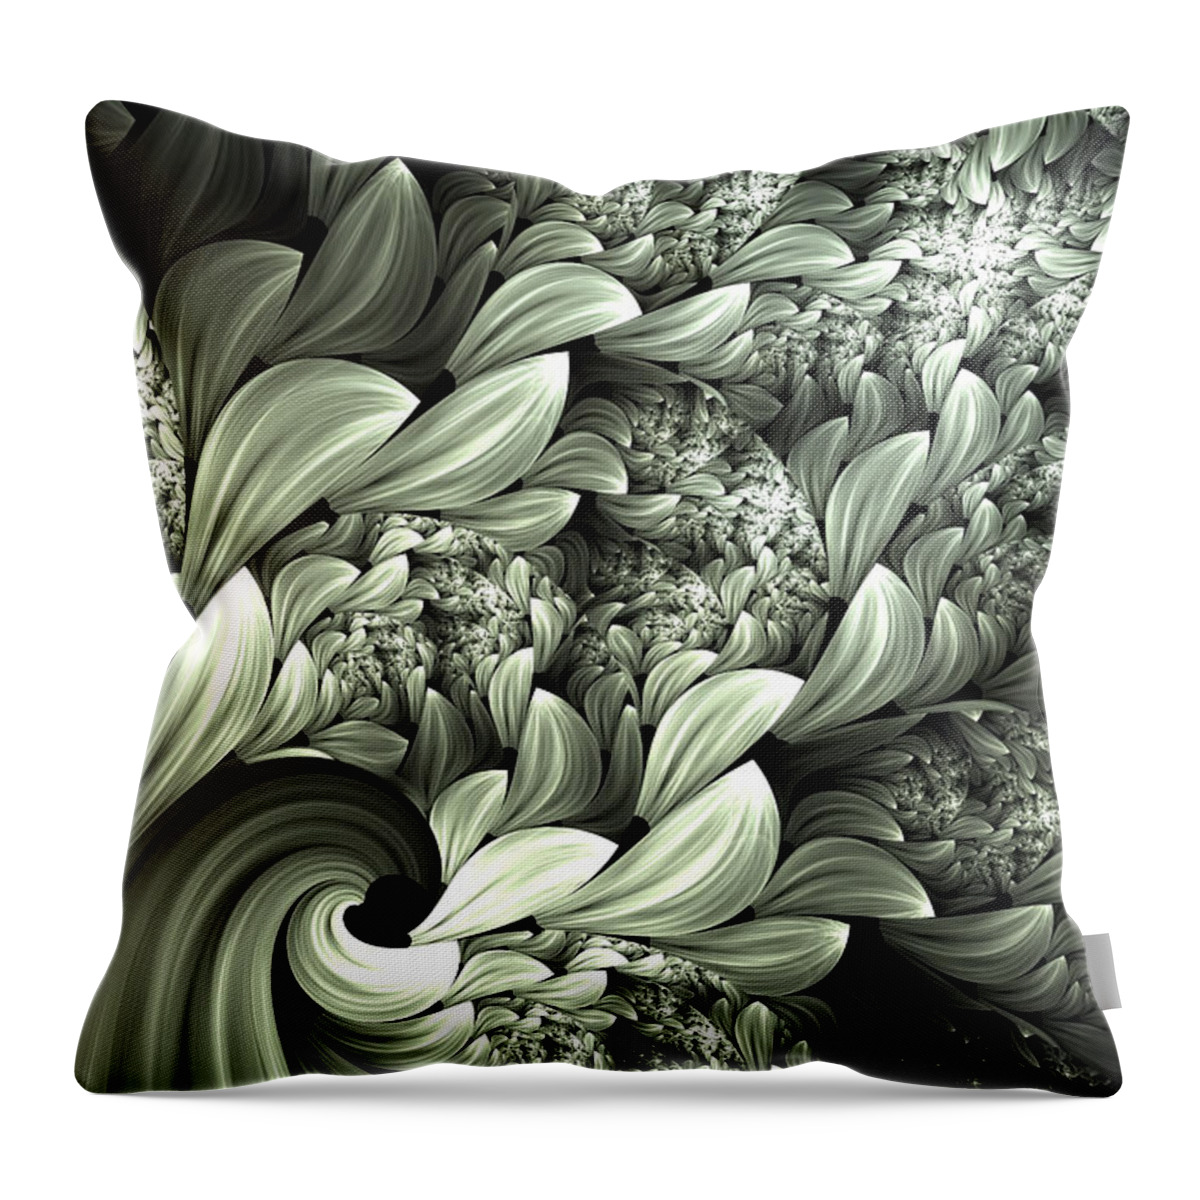 Abstract Throw Pillow featuring the digital art Pastel Garden Abstract by Georgiana Romanovna